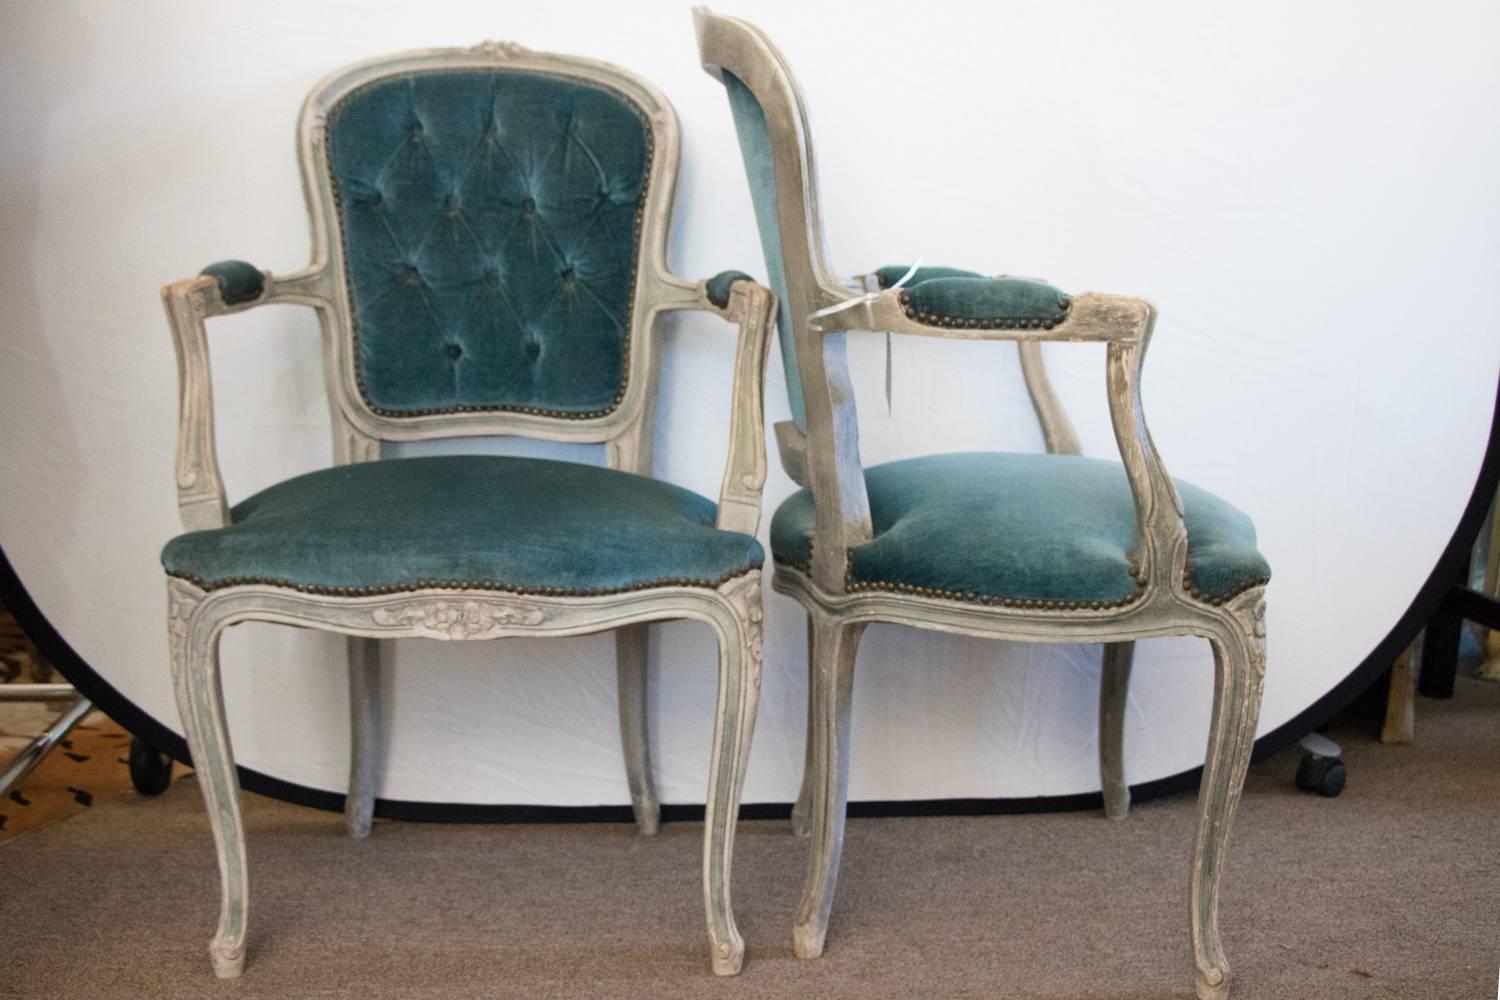 Fabulous Pair of 1929 Louis XV Stunning Sea Bleu Tufted Velvet French Arm Chairs.  Hand Carved Florets Adorn These Fantastically Romantic Chairs.  Of the Sea Color with White Washed Mix of White and Soft Misty Gray.